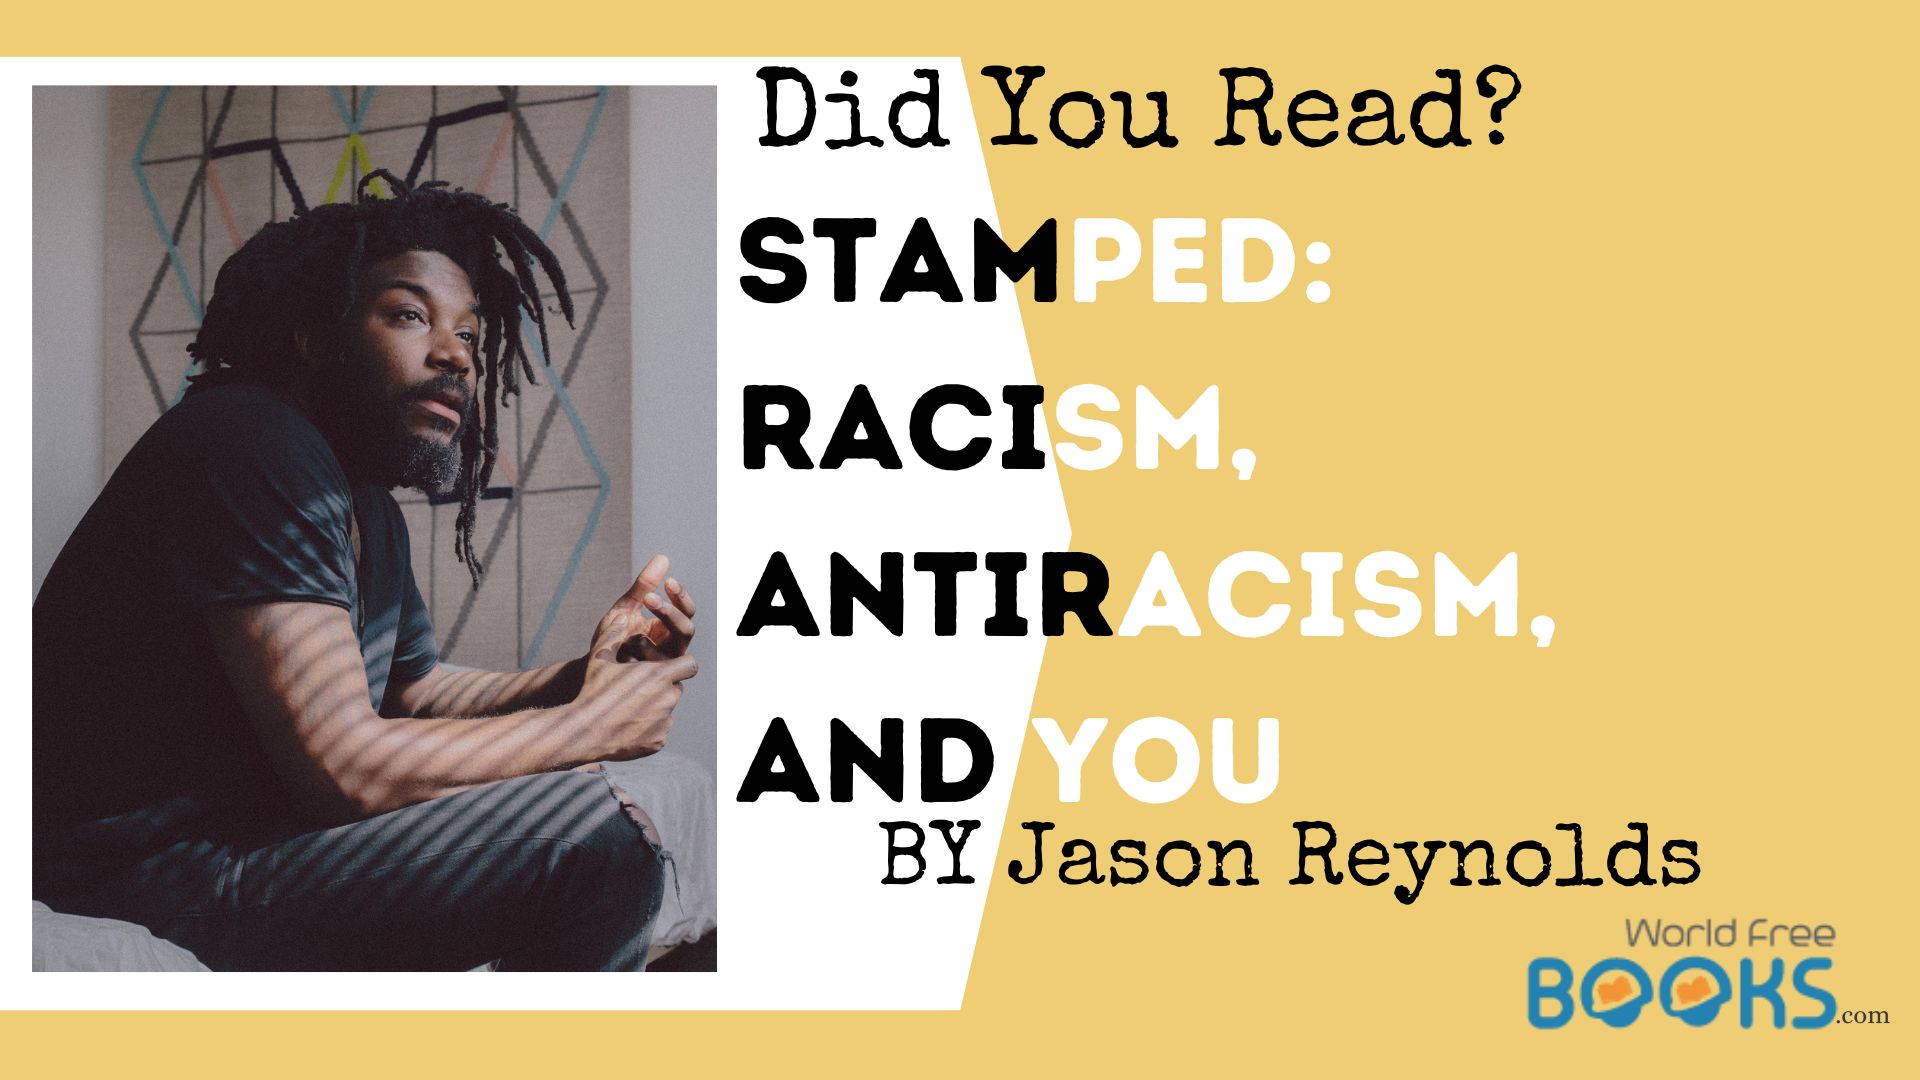 Did You Read 'Stamped: Racism, Antiracism, and You' Book?